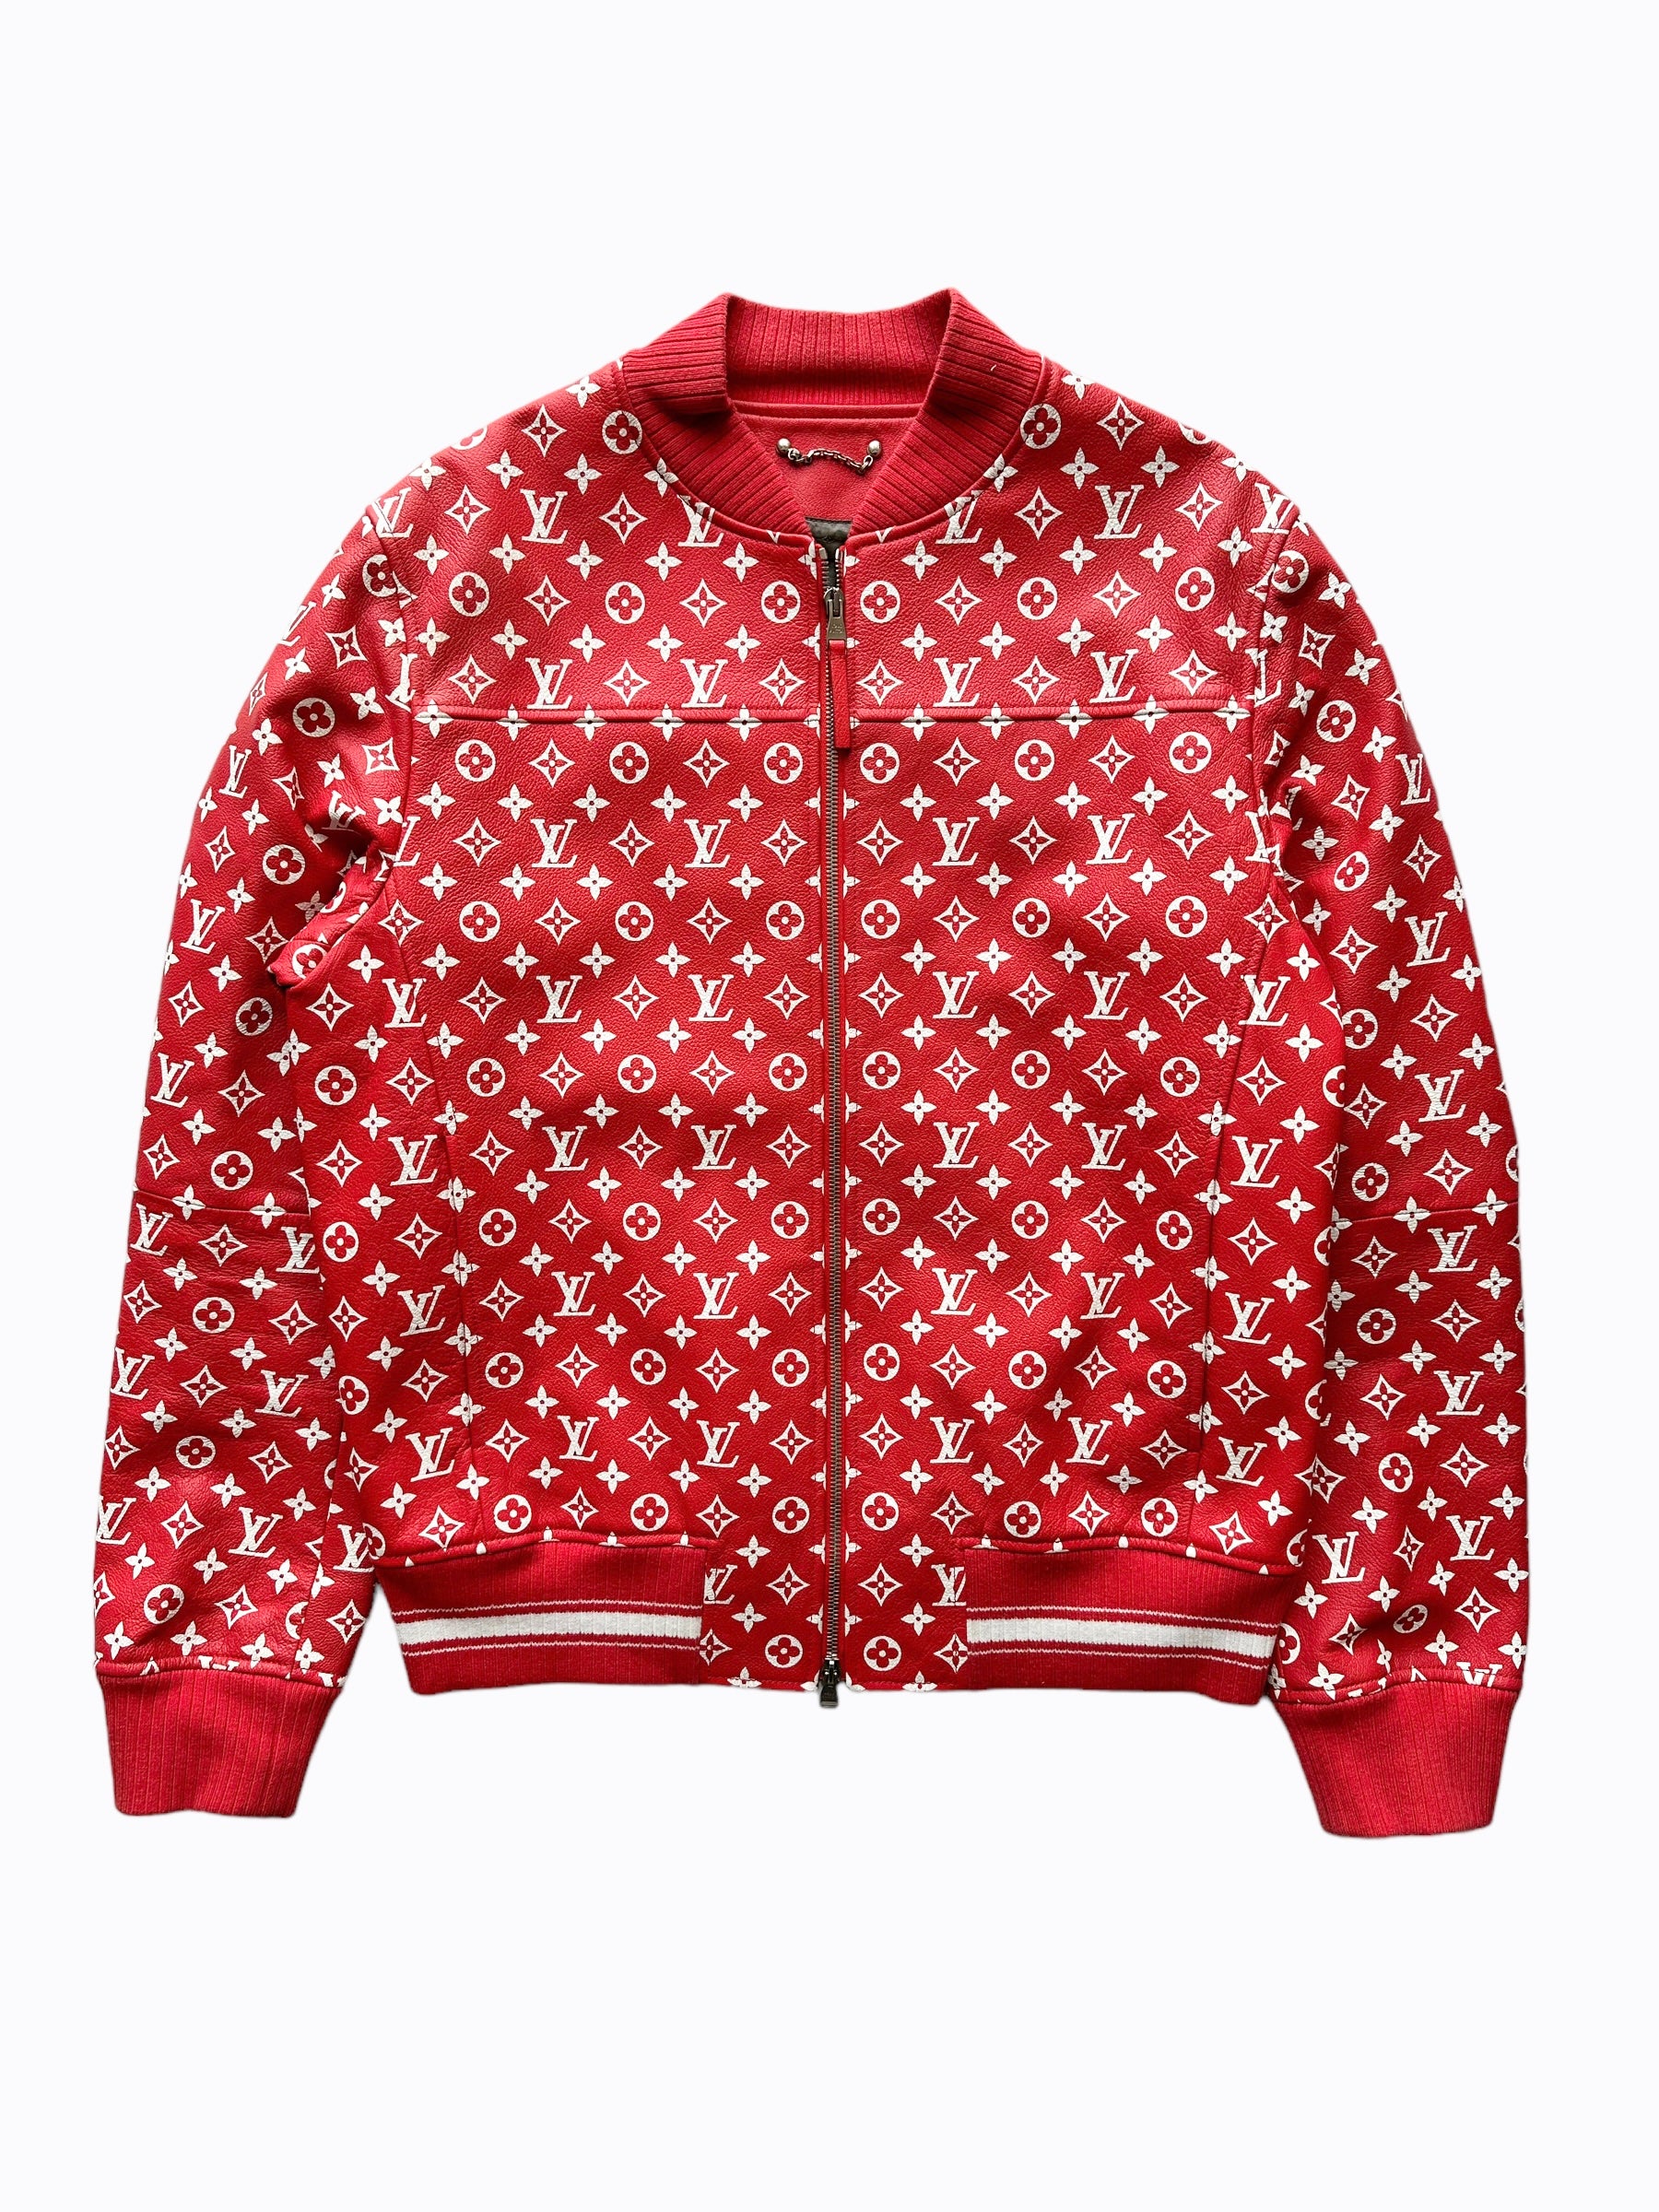 Louis Vuitton x Supreme  Red and White Monogram Coated